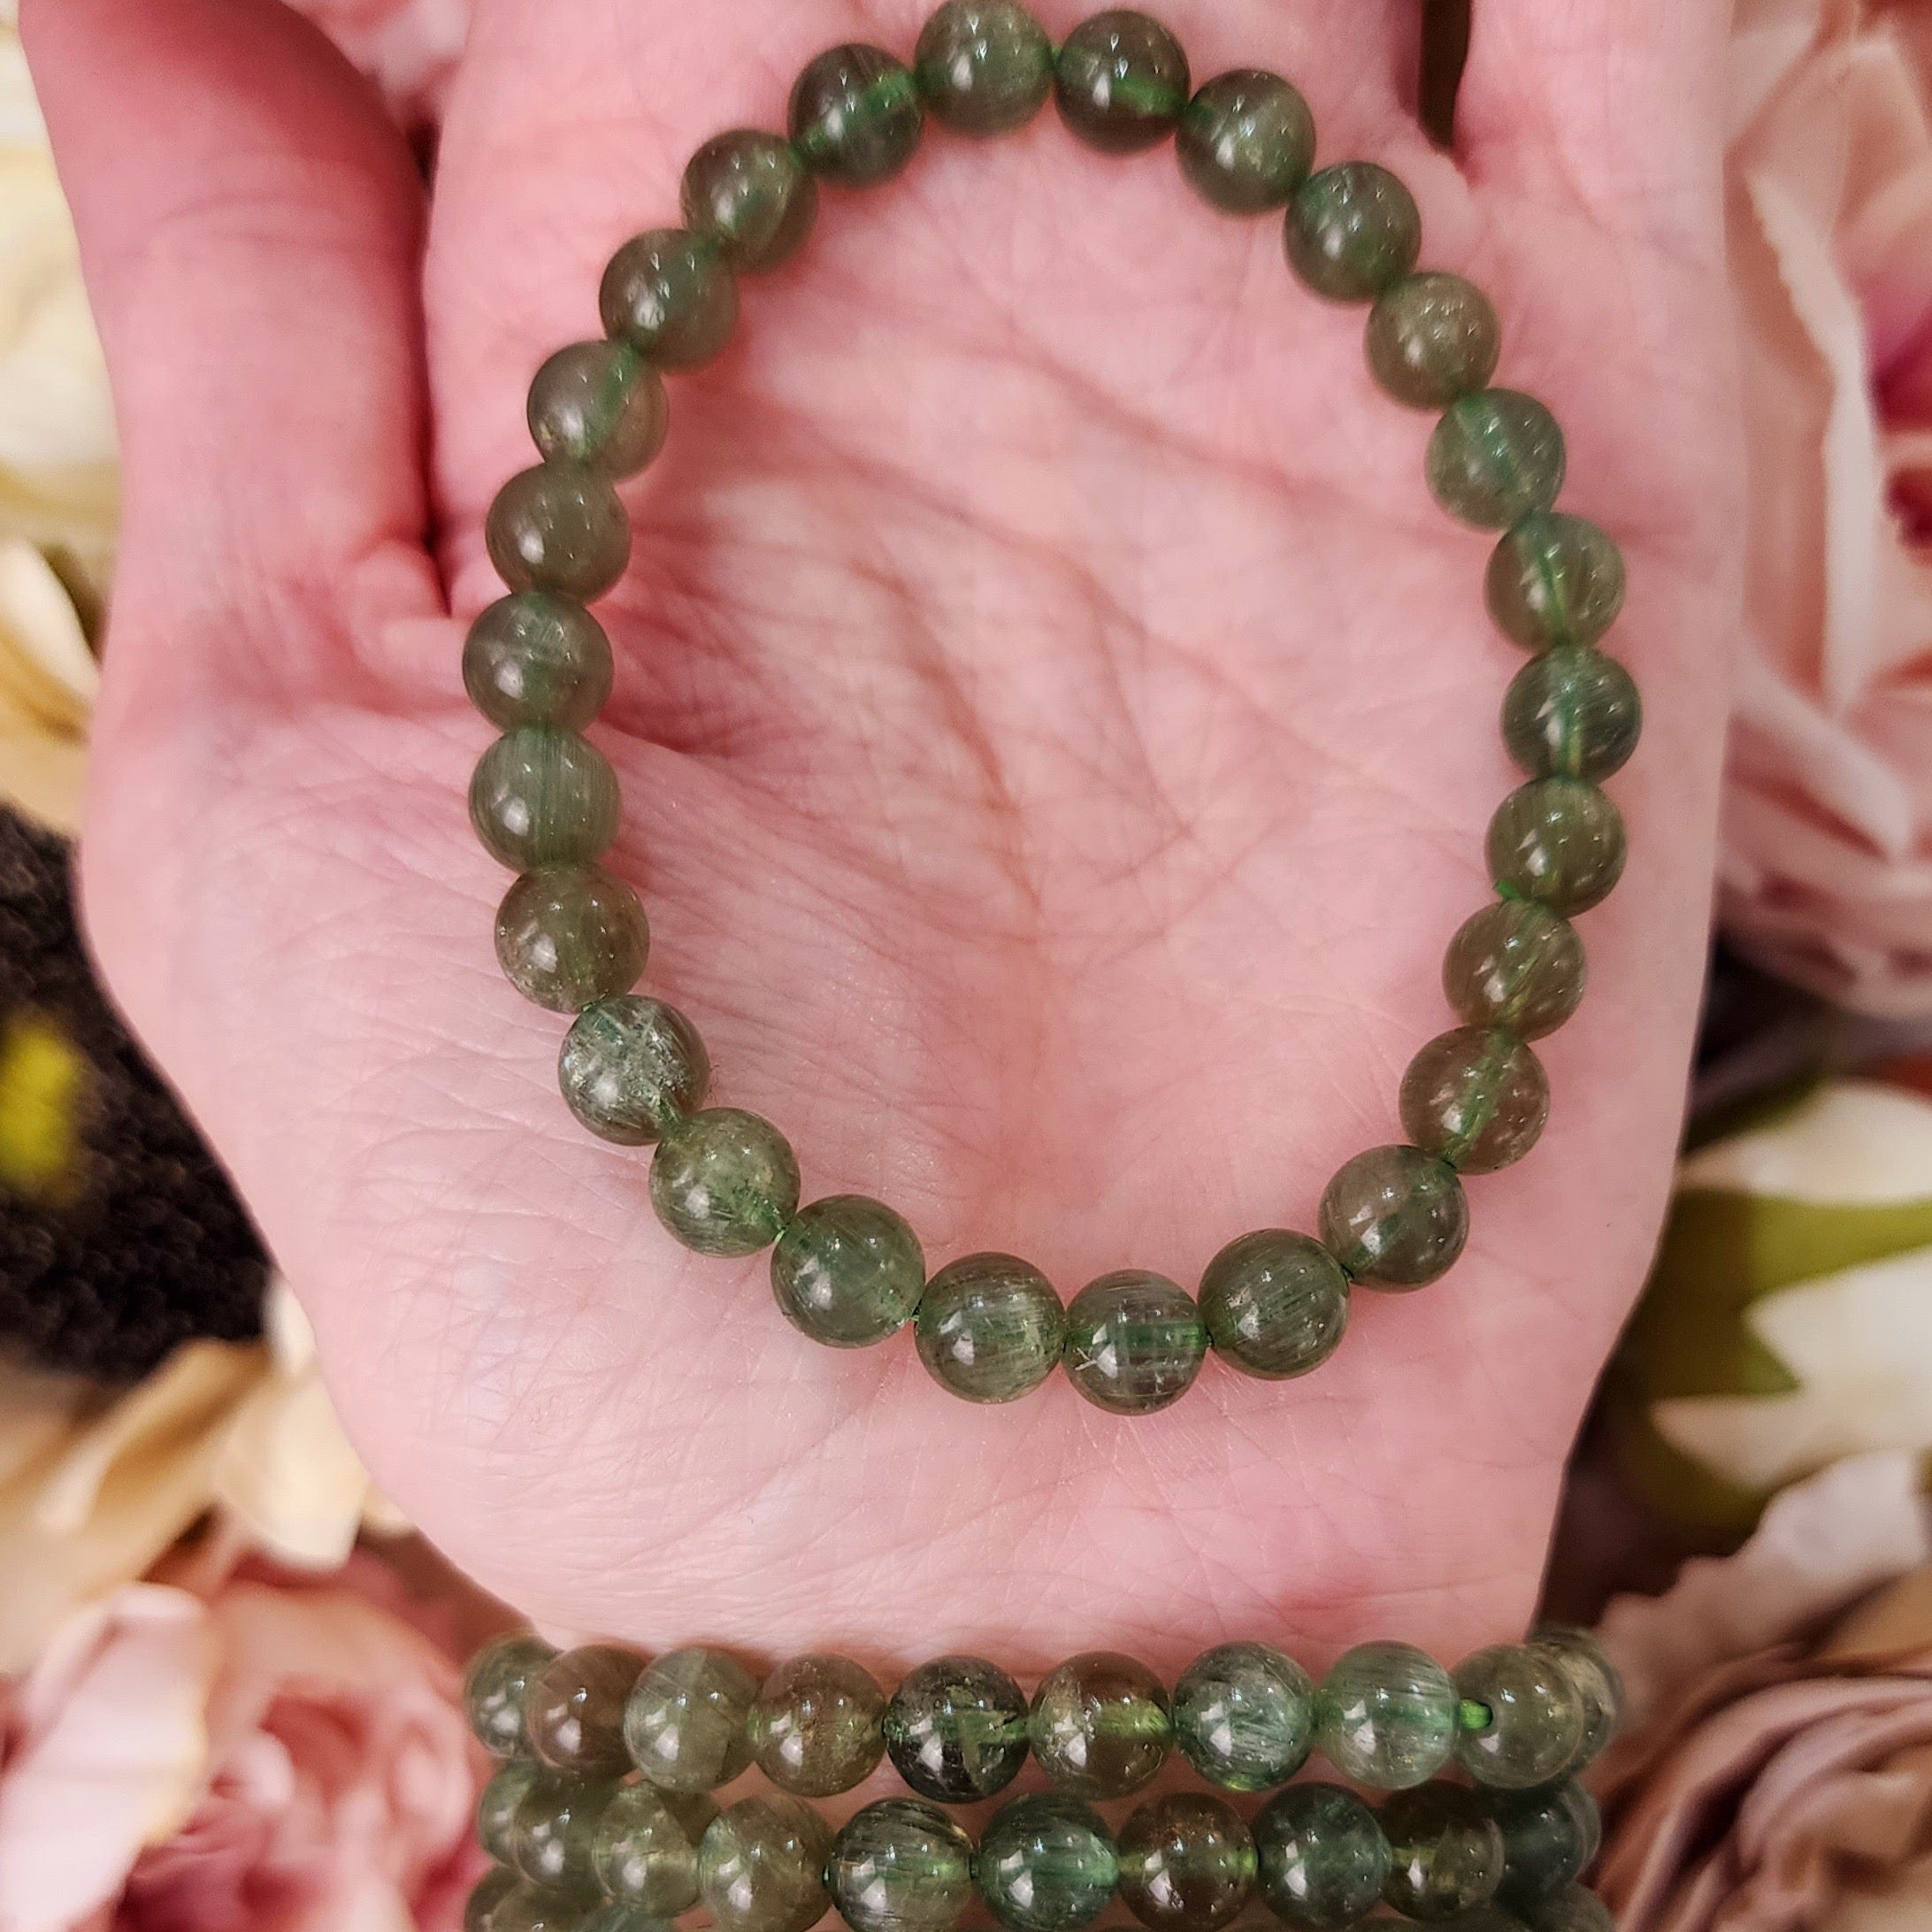 Green Apatite Bracelet (High Quality) for Emotional Balance, Logic and Stress Relief